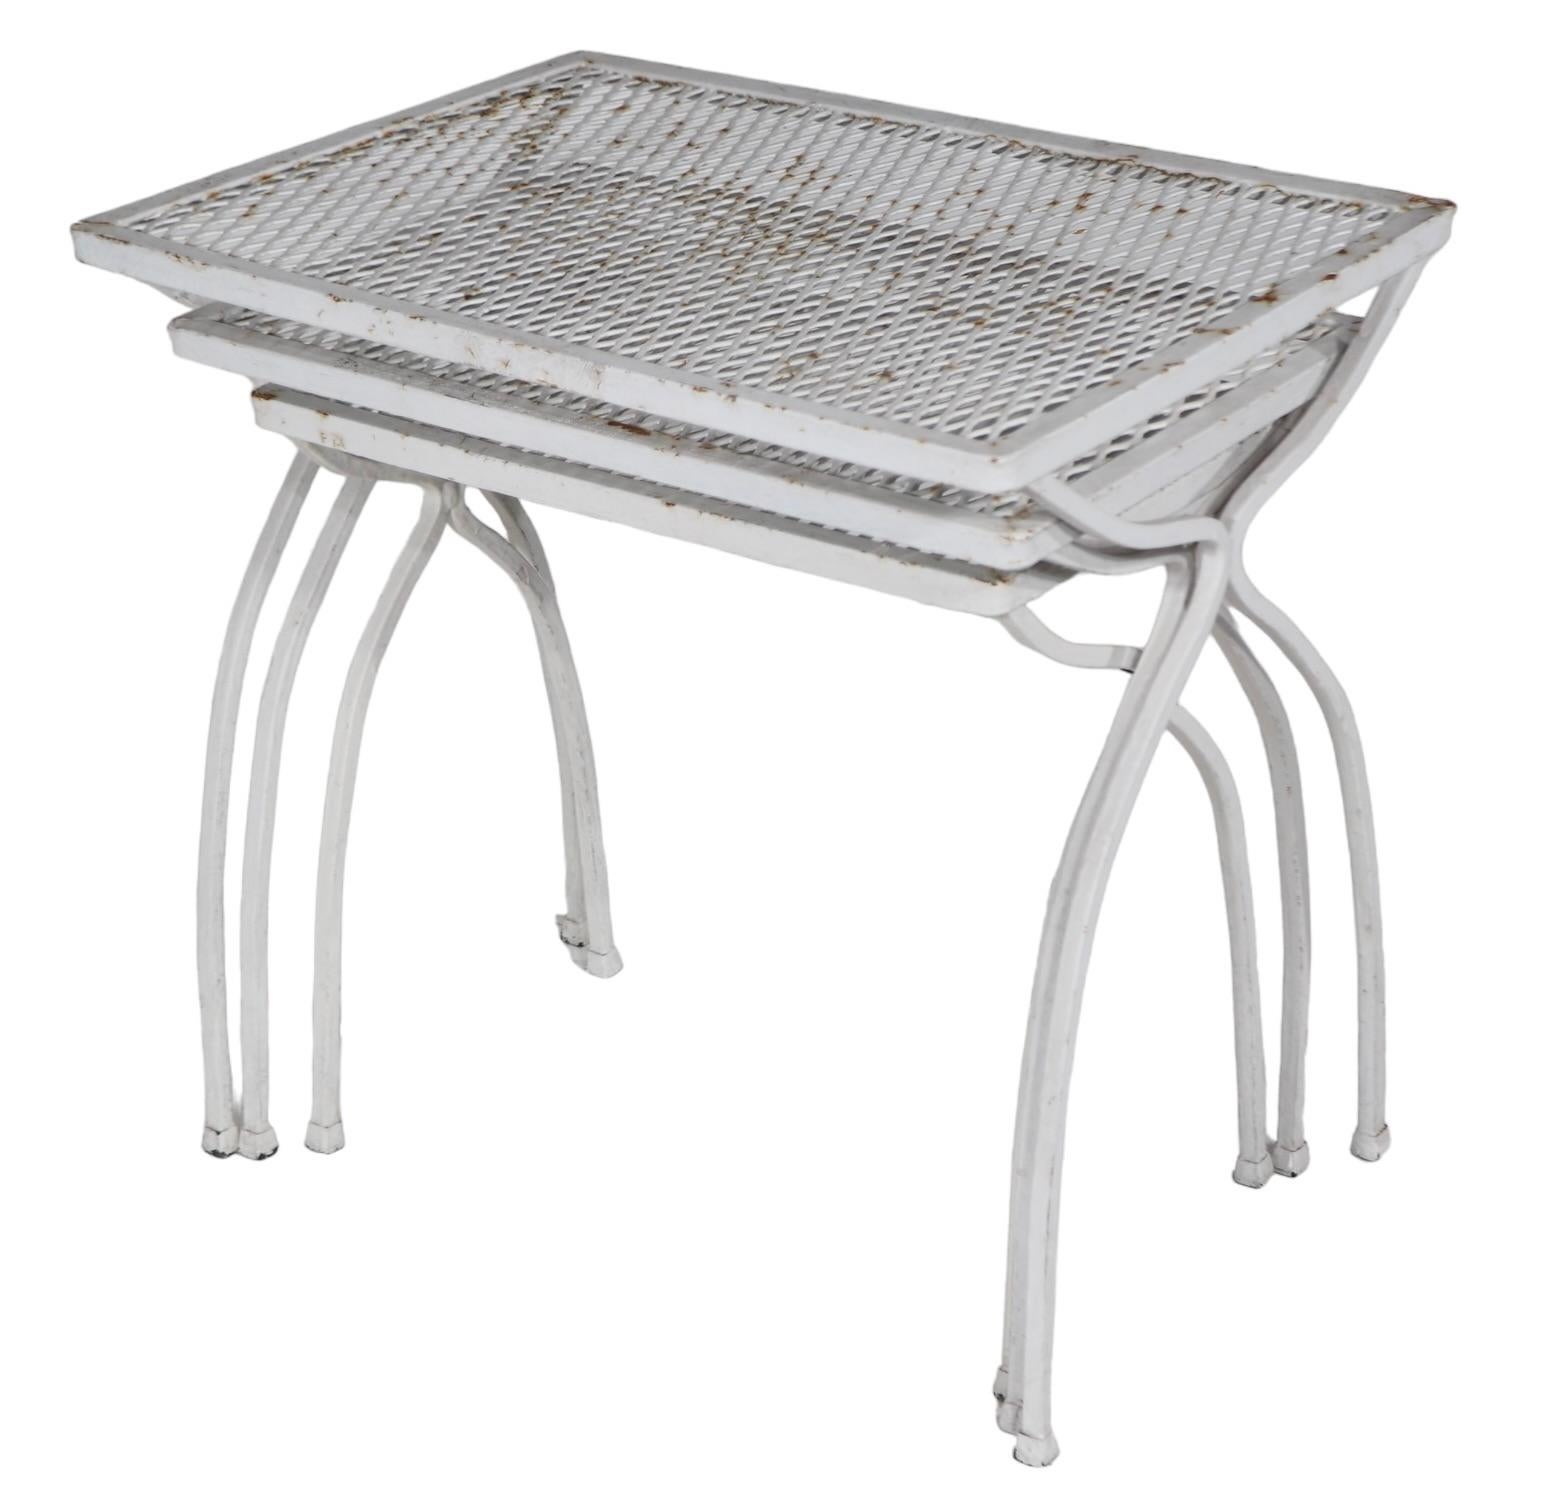 Classic Mid Century wrought iron and metal mesh garden, patio, poolside nesting tables attributed to Salterini, circa 1950's. The tables feature  stylized legs of squared iron, with rectangular metal mesh tops, perfect for either indoor or outdoor